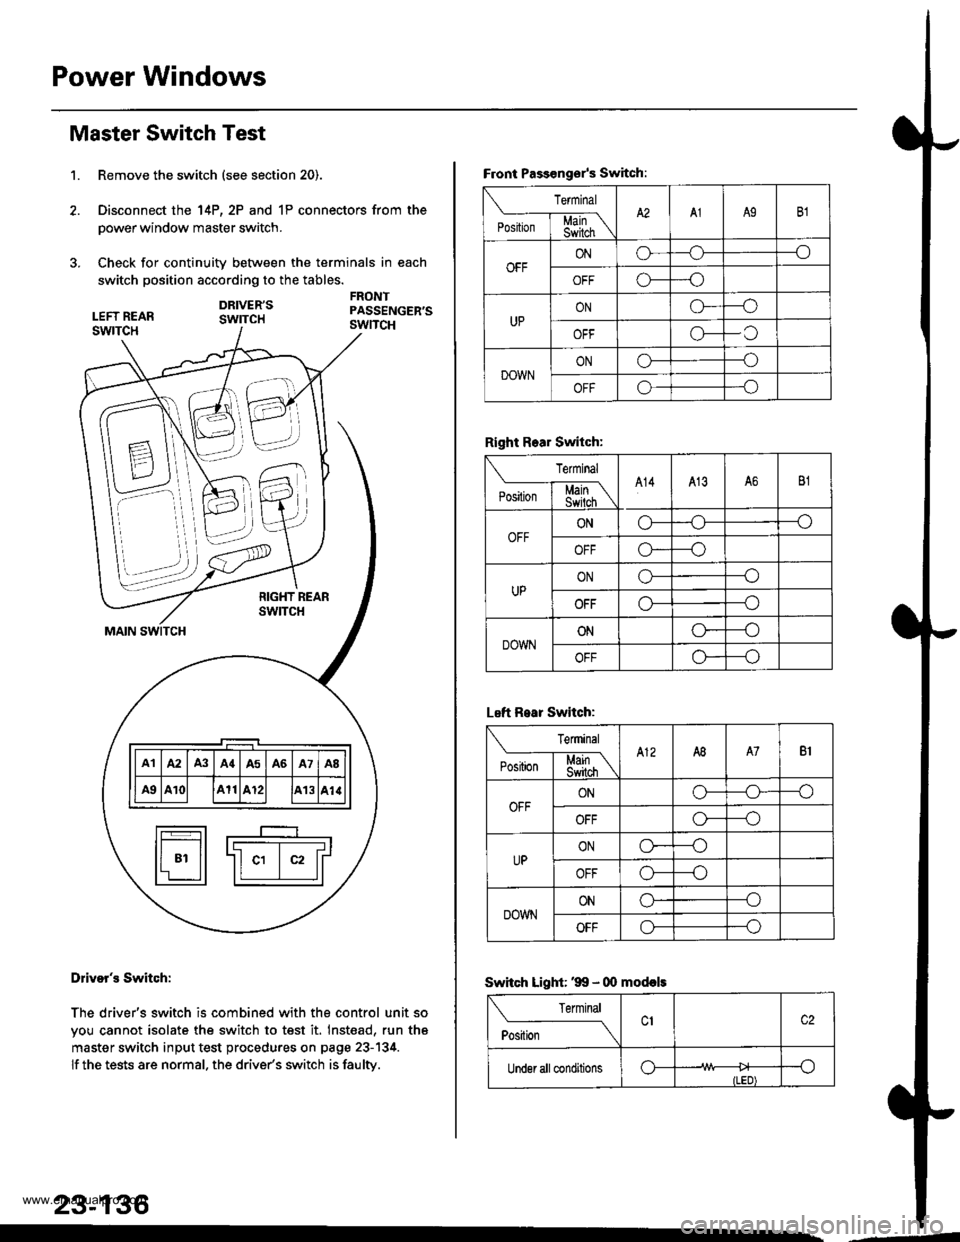 HONDA CR-V 1999 RD1-RD3 / 1.G Workshop Manual 
Power Windows
1.
Master Switch Test
Remove the switch (see section 20).
Disconnect the 14P, 2P and 1P connectors from the
power window master switch.
Check for continuity between the terminals in eac